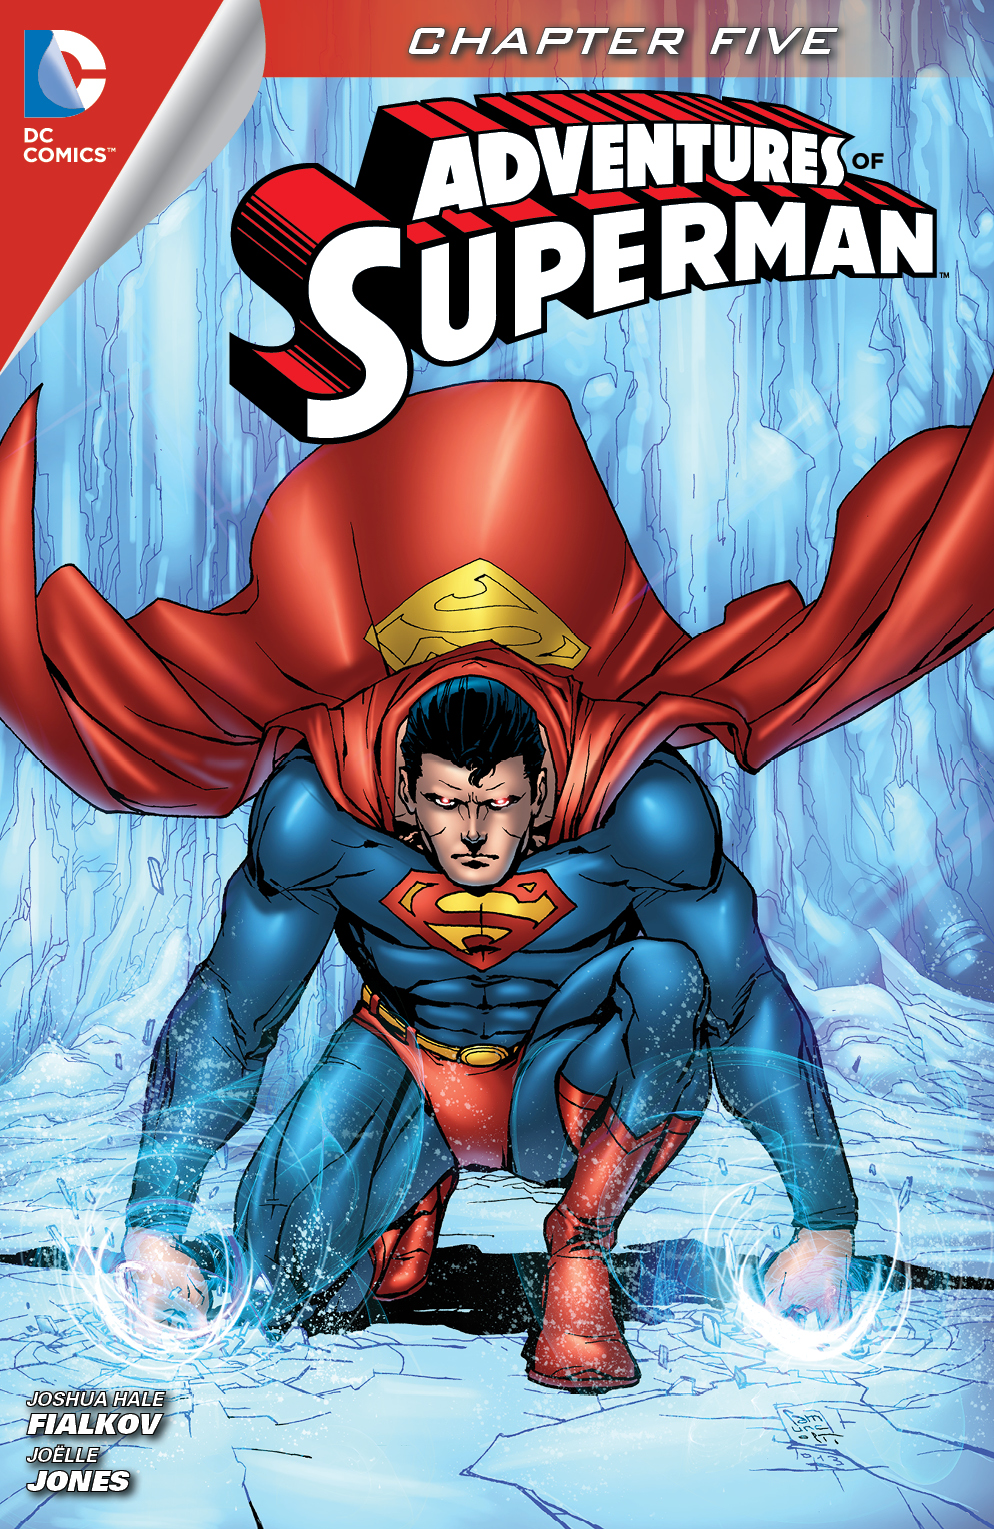 Adventures of Superman (2013-) #5 preview images